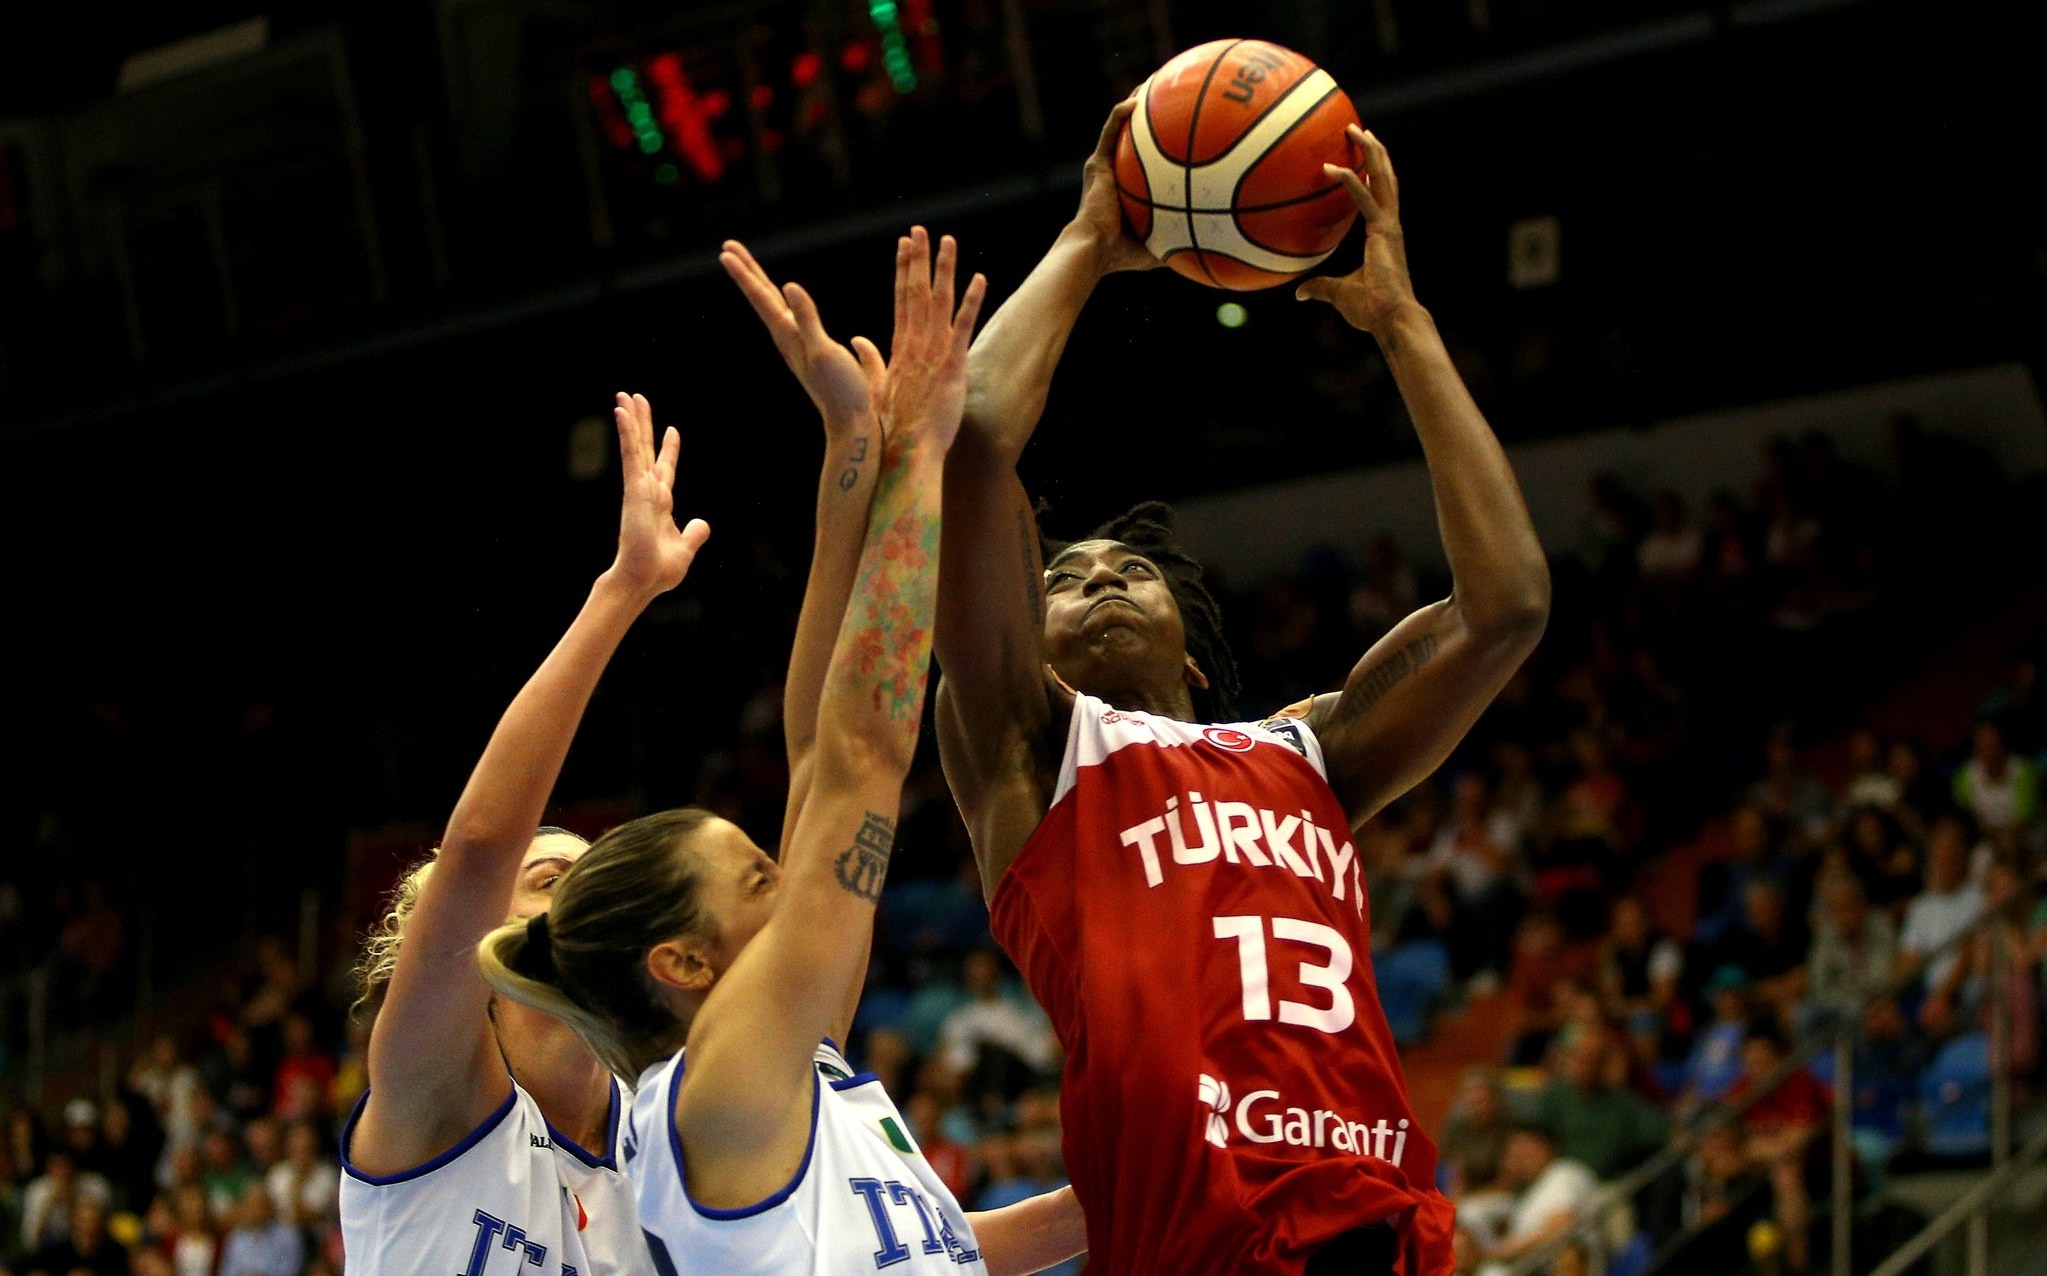 Quanitra Hollingsworth (R) of Turkey in action against Alessandra Formica and Sabrina Cinili of Italy.